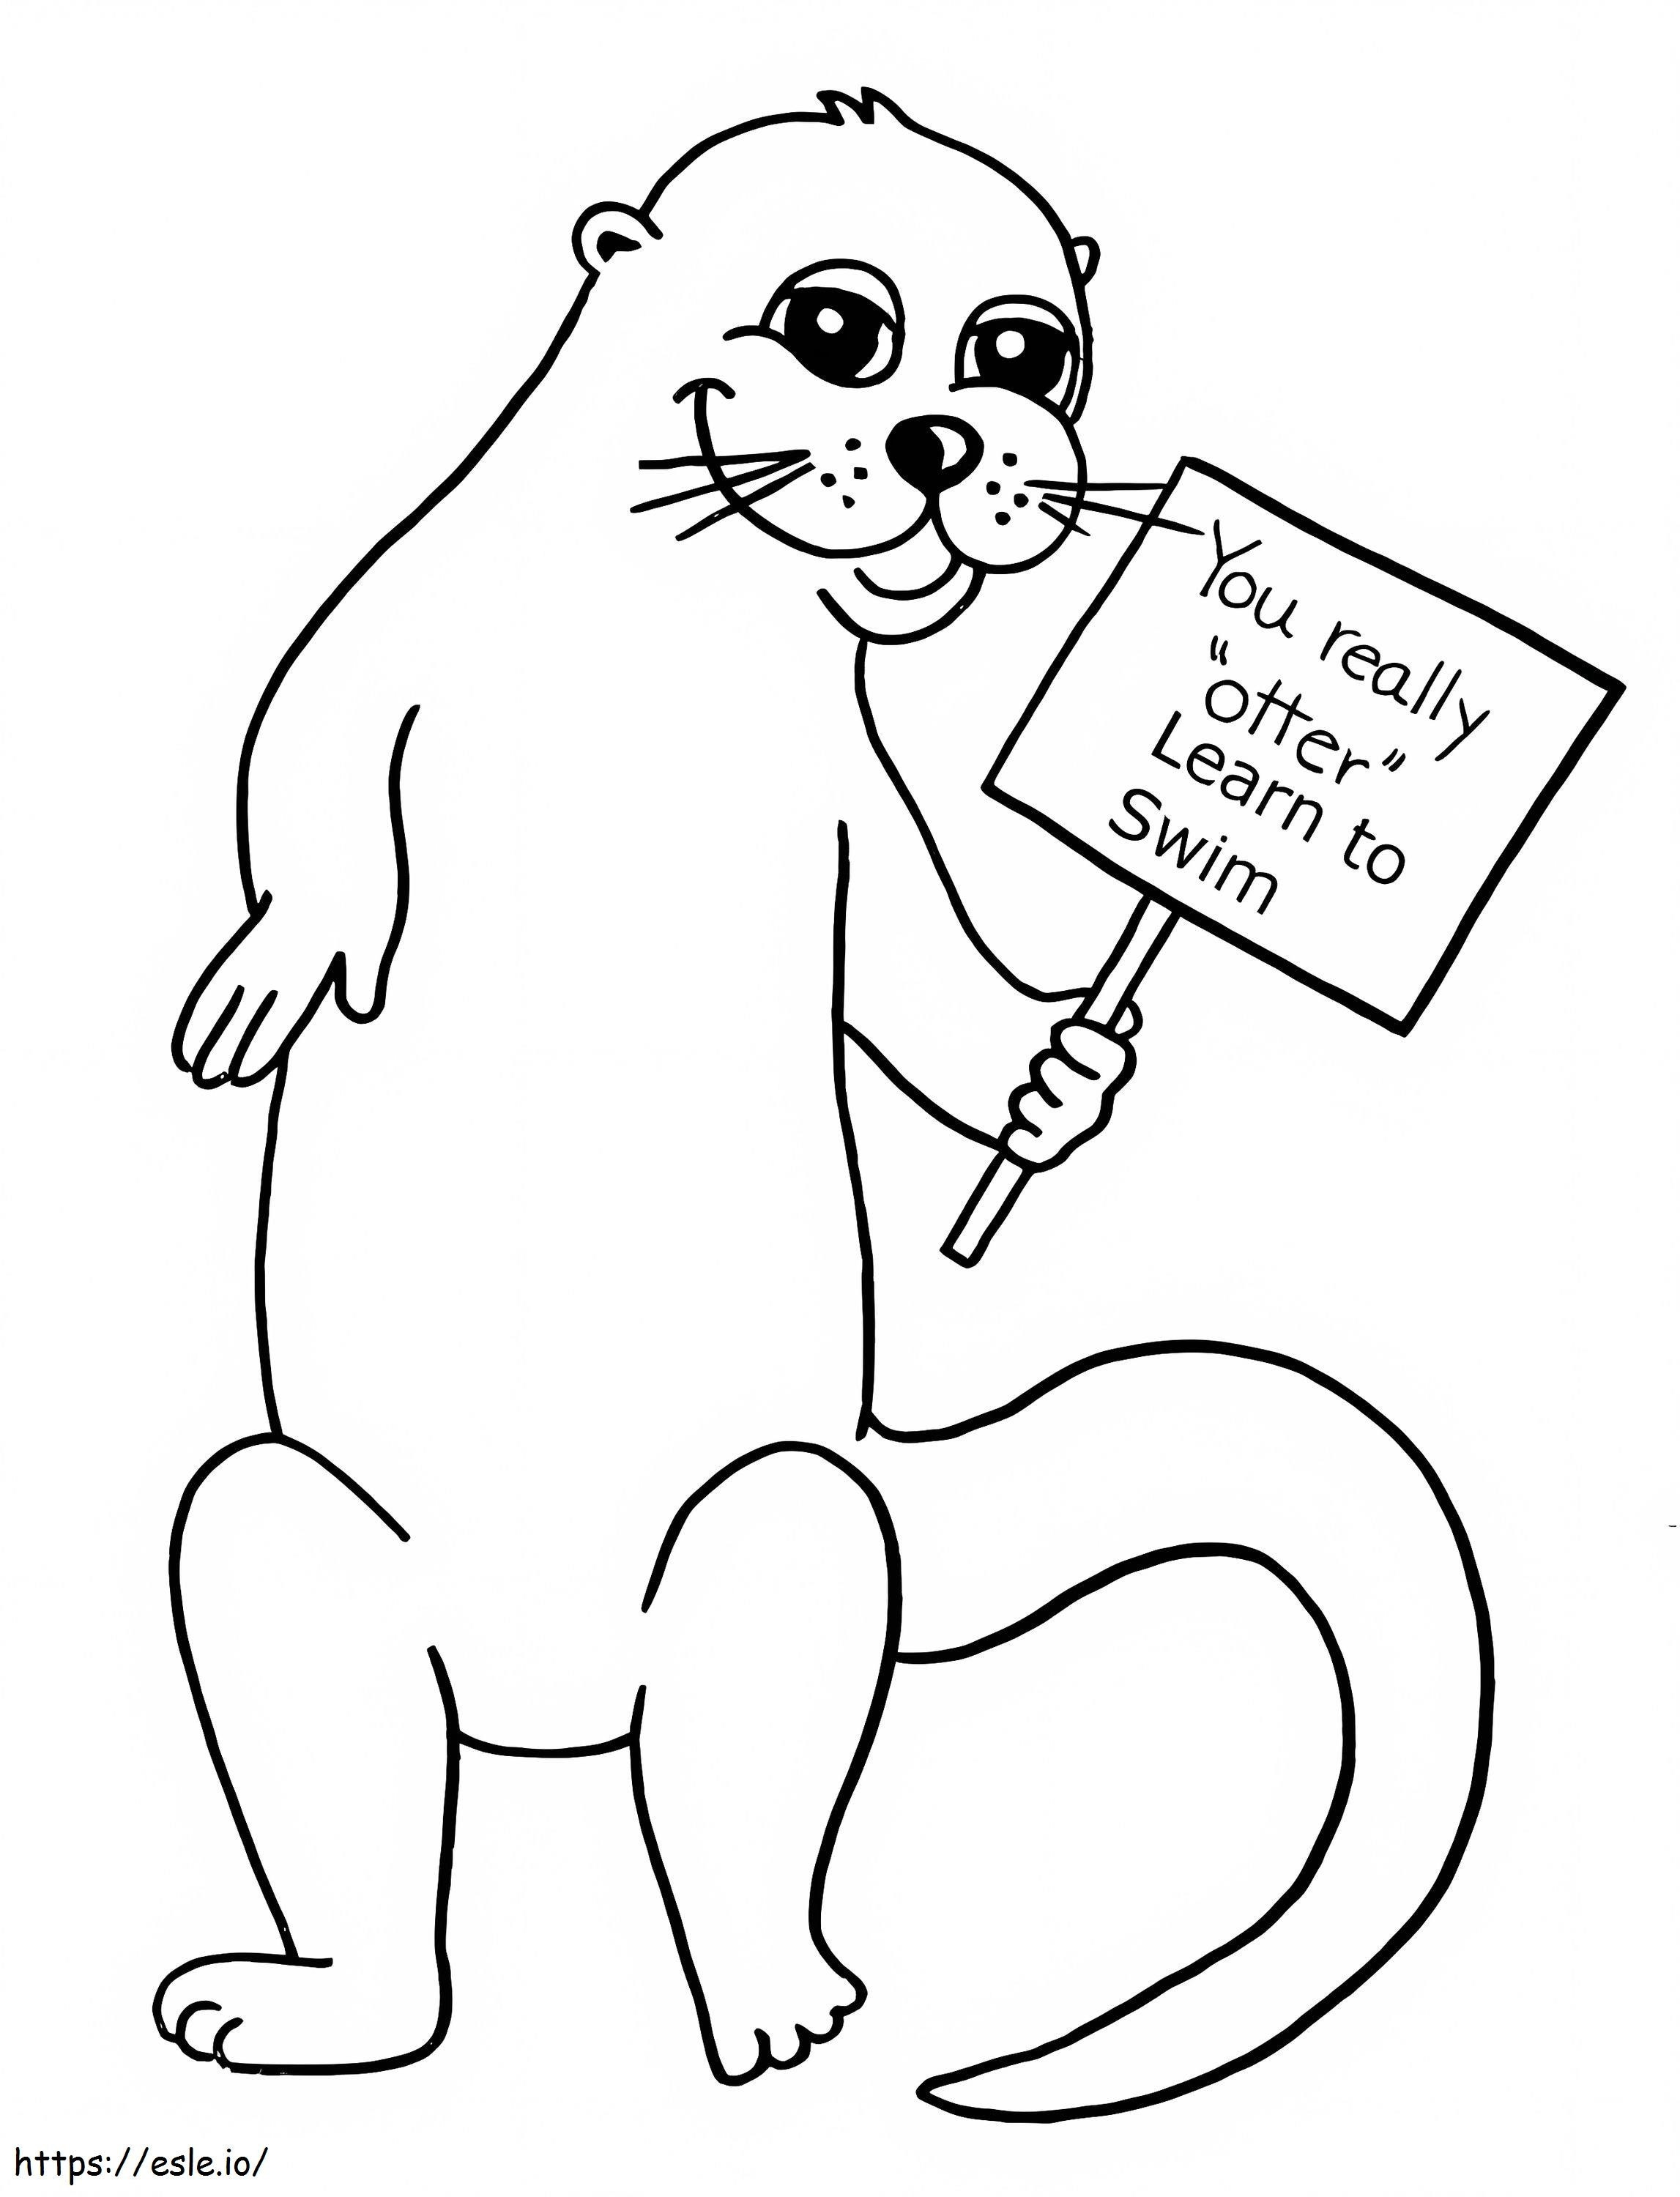 Smiling Otter coloring page